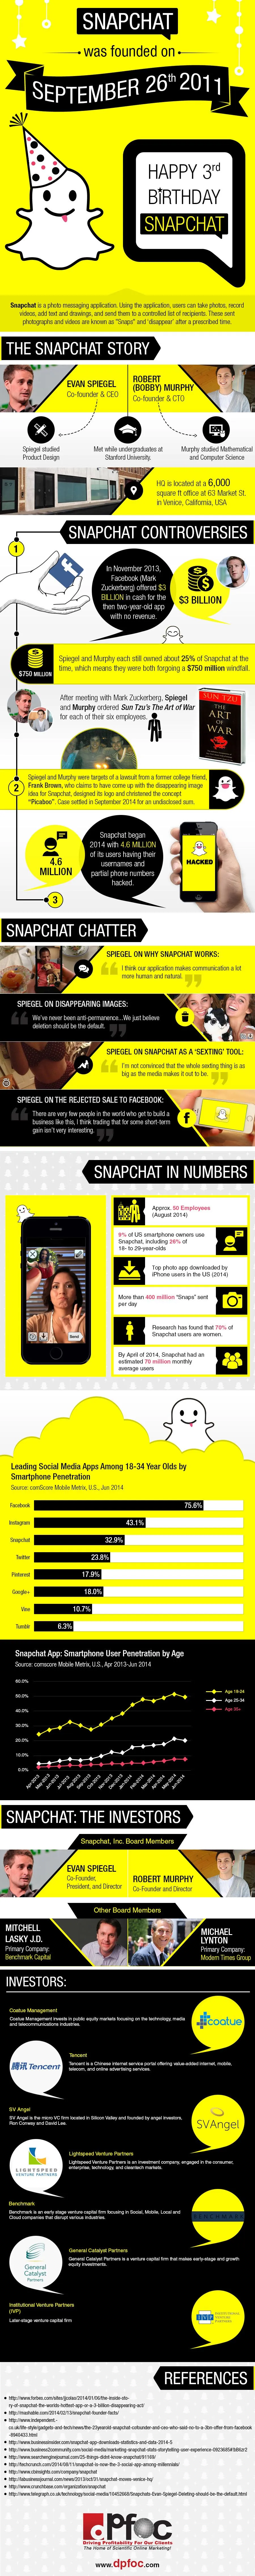 The Timeline Of Snapchat - infographic